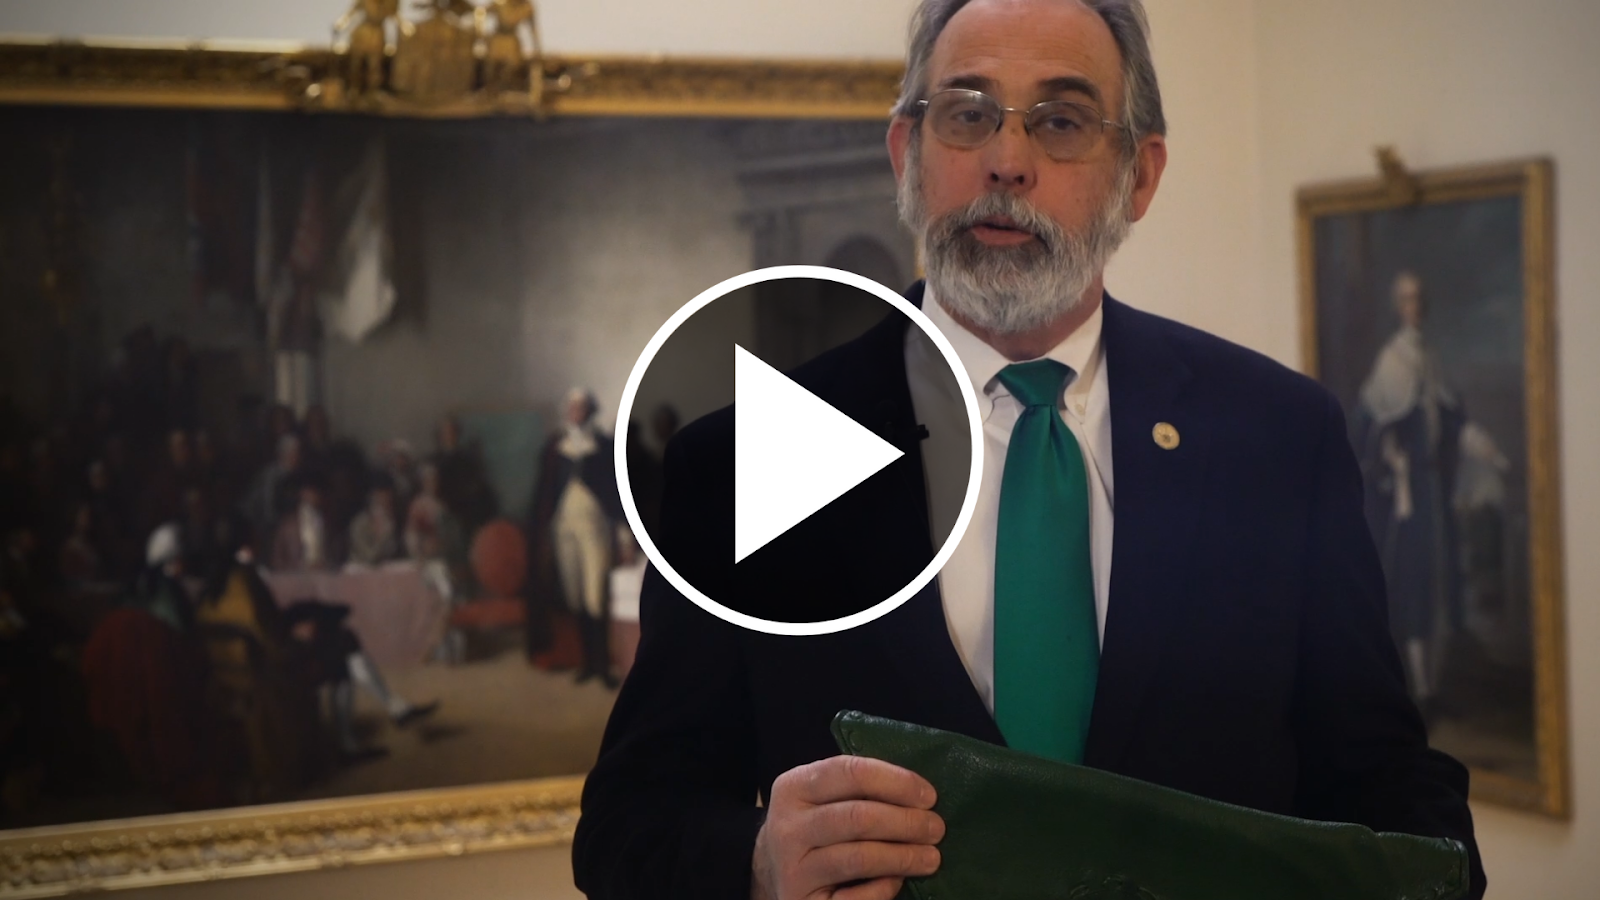 Secretary Cavey and Governor Hogan announce green bag appointments in a video